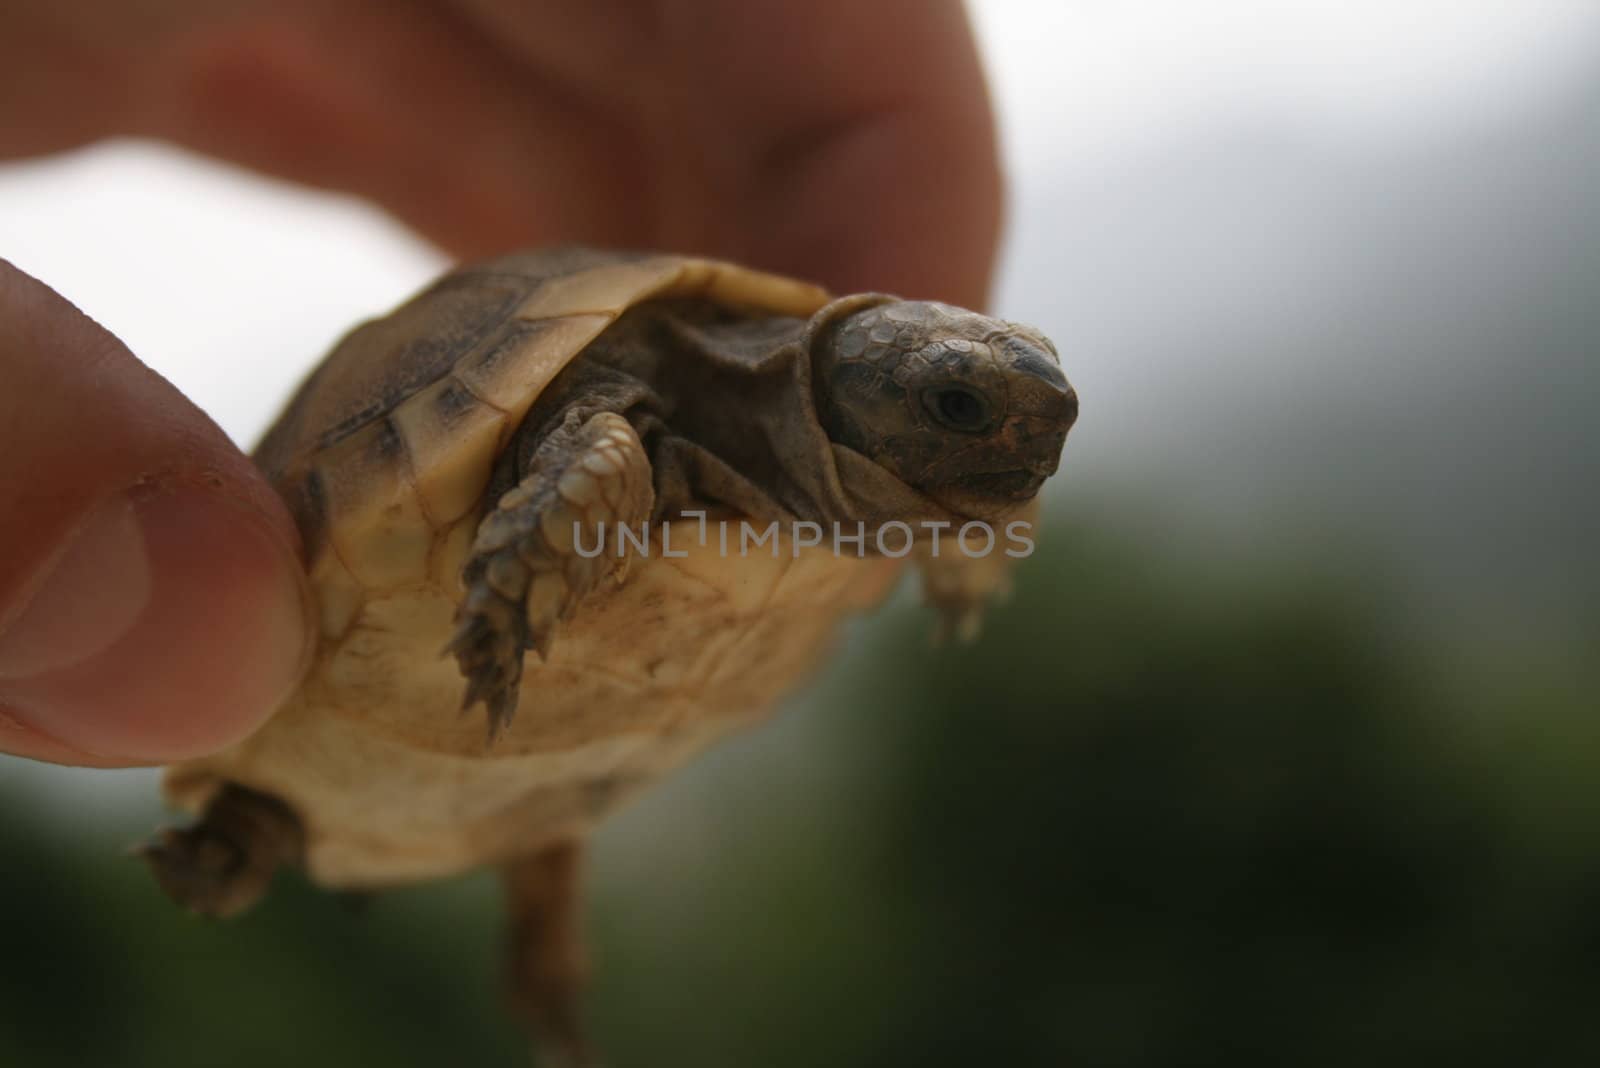 Small turtle in the hands